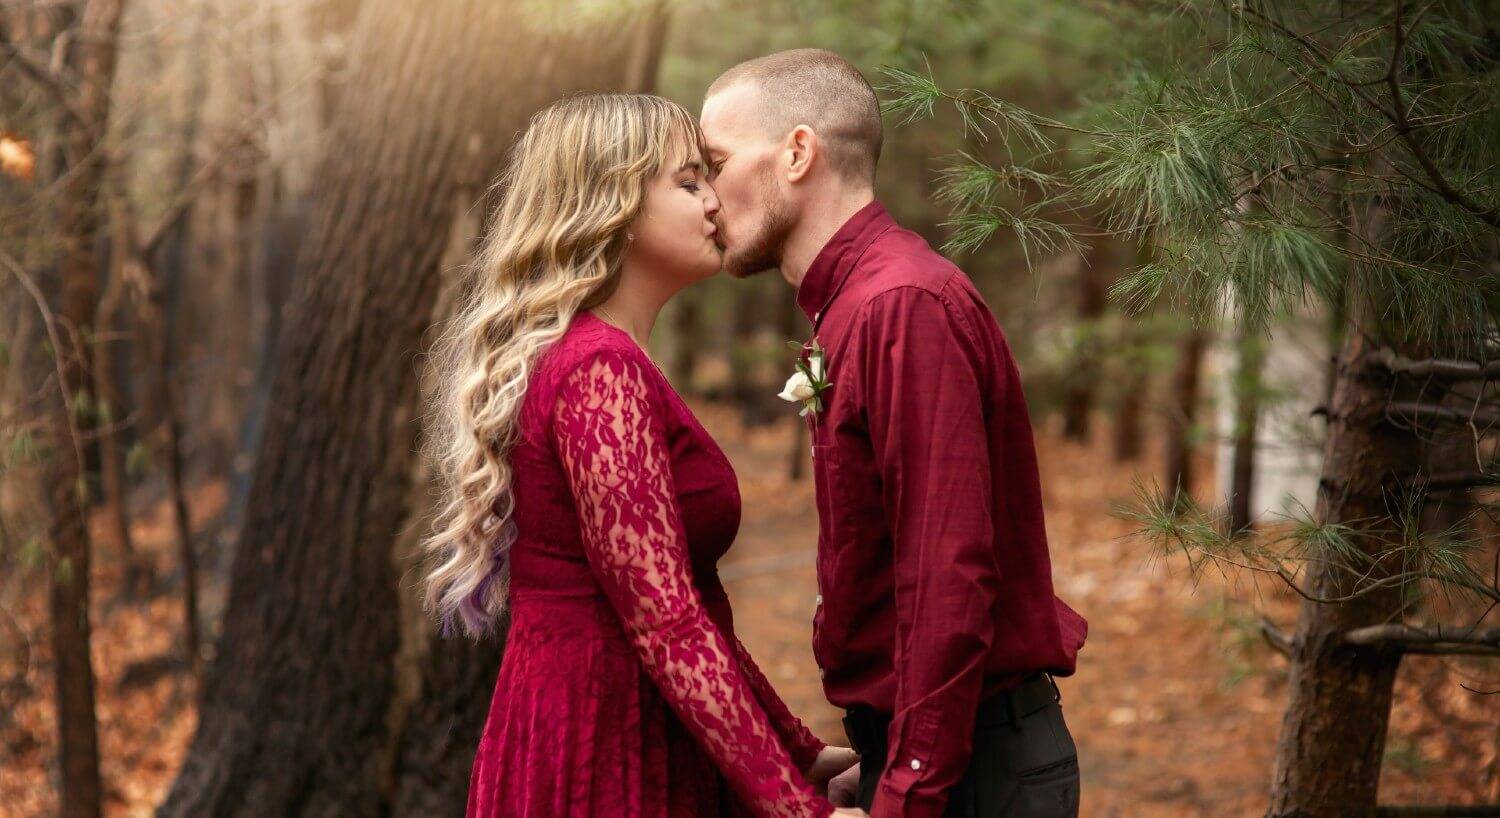 A man and woman both wearing burgundy sharing a kiss in the woods while holding hands